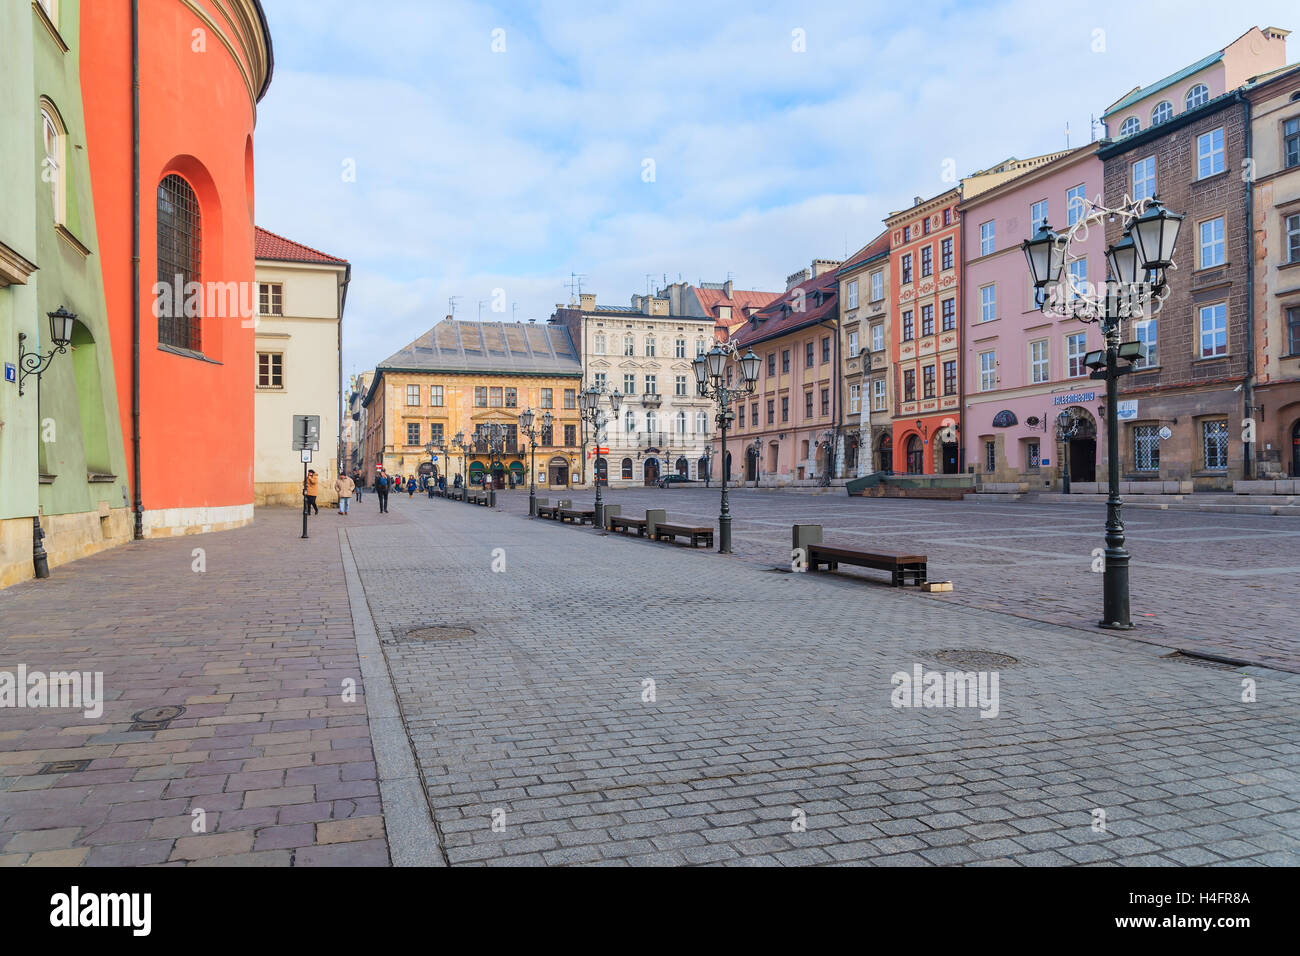 KRAKOW, POLAND - DEC 10, 2014: colourful houses on square in Krakow. Many tourists visit Krakow which is most popular destination in Poland. Stock Photo